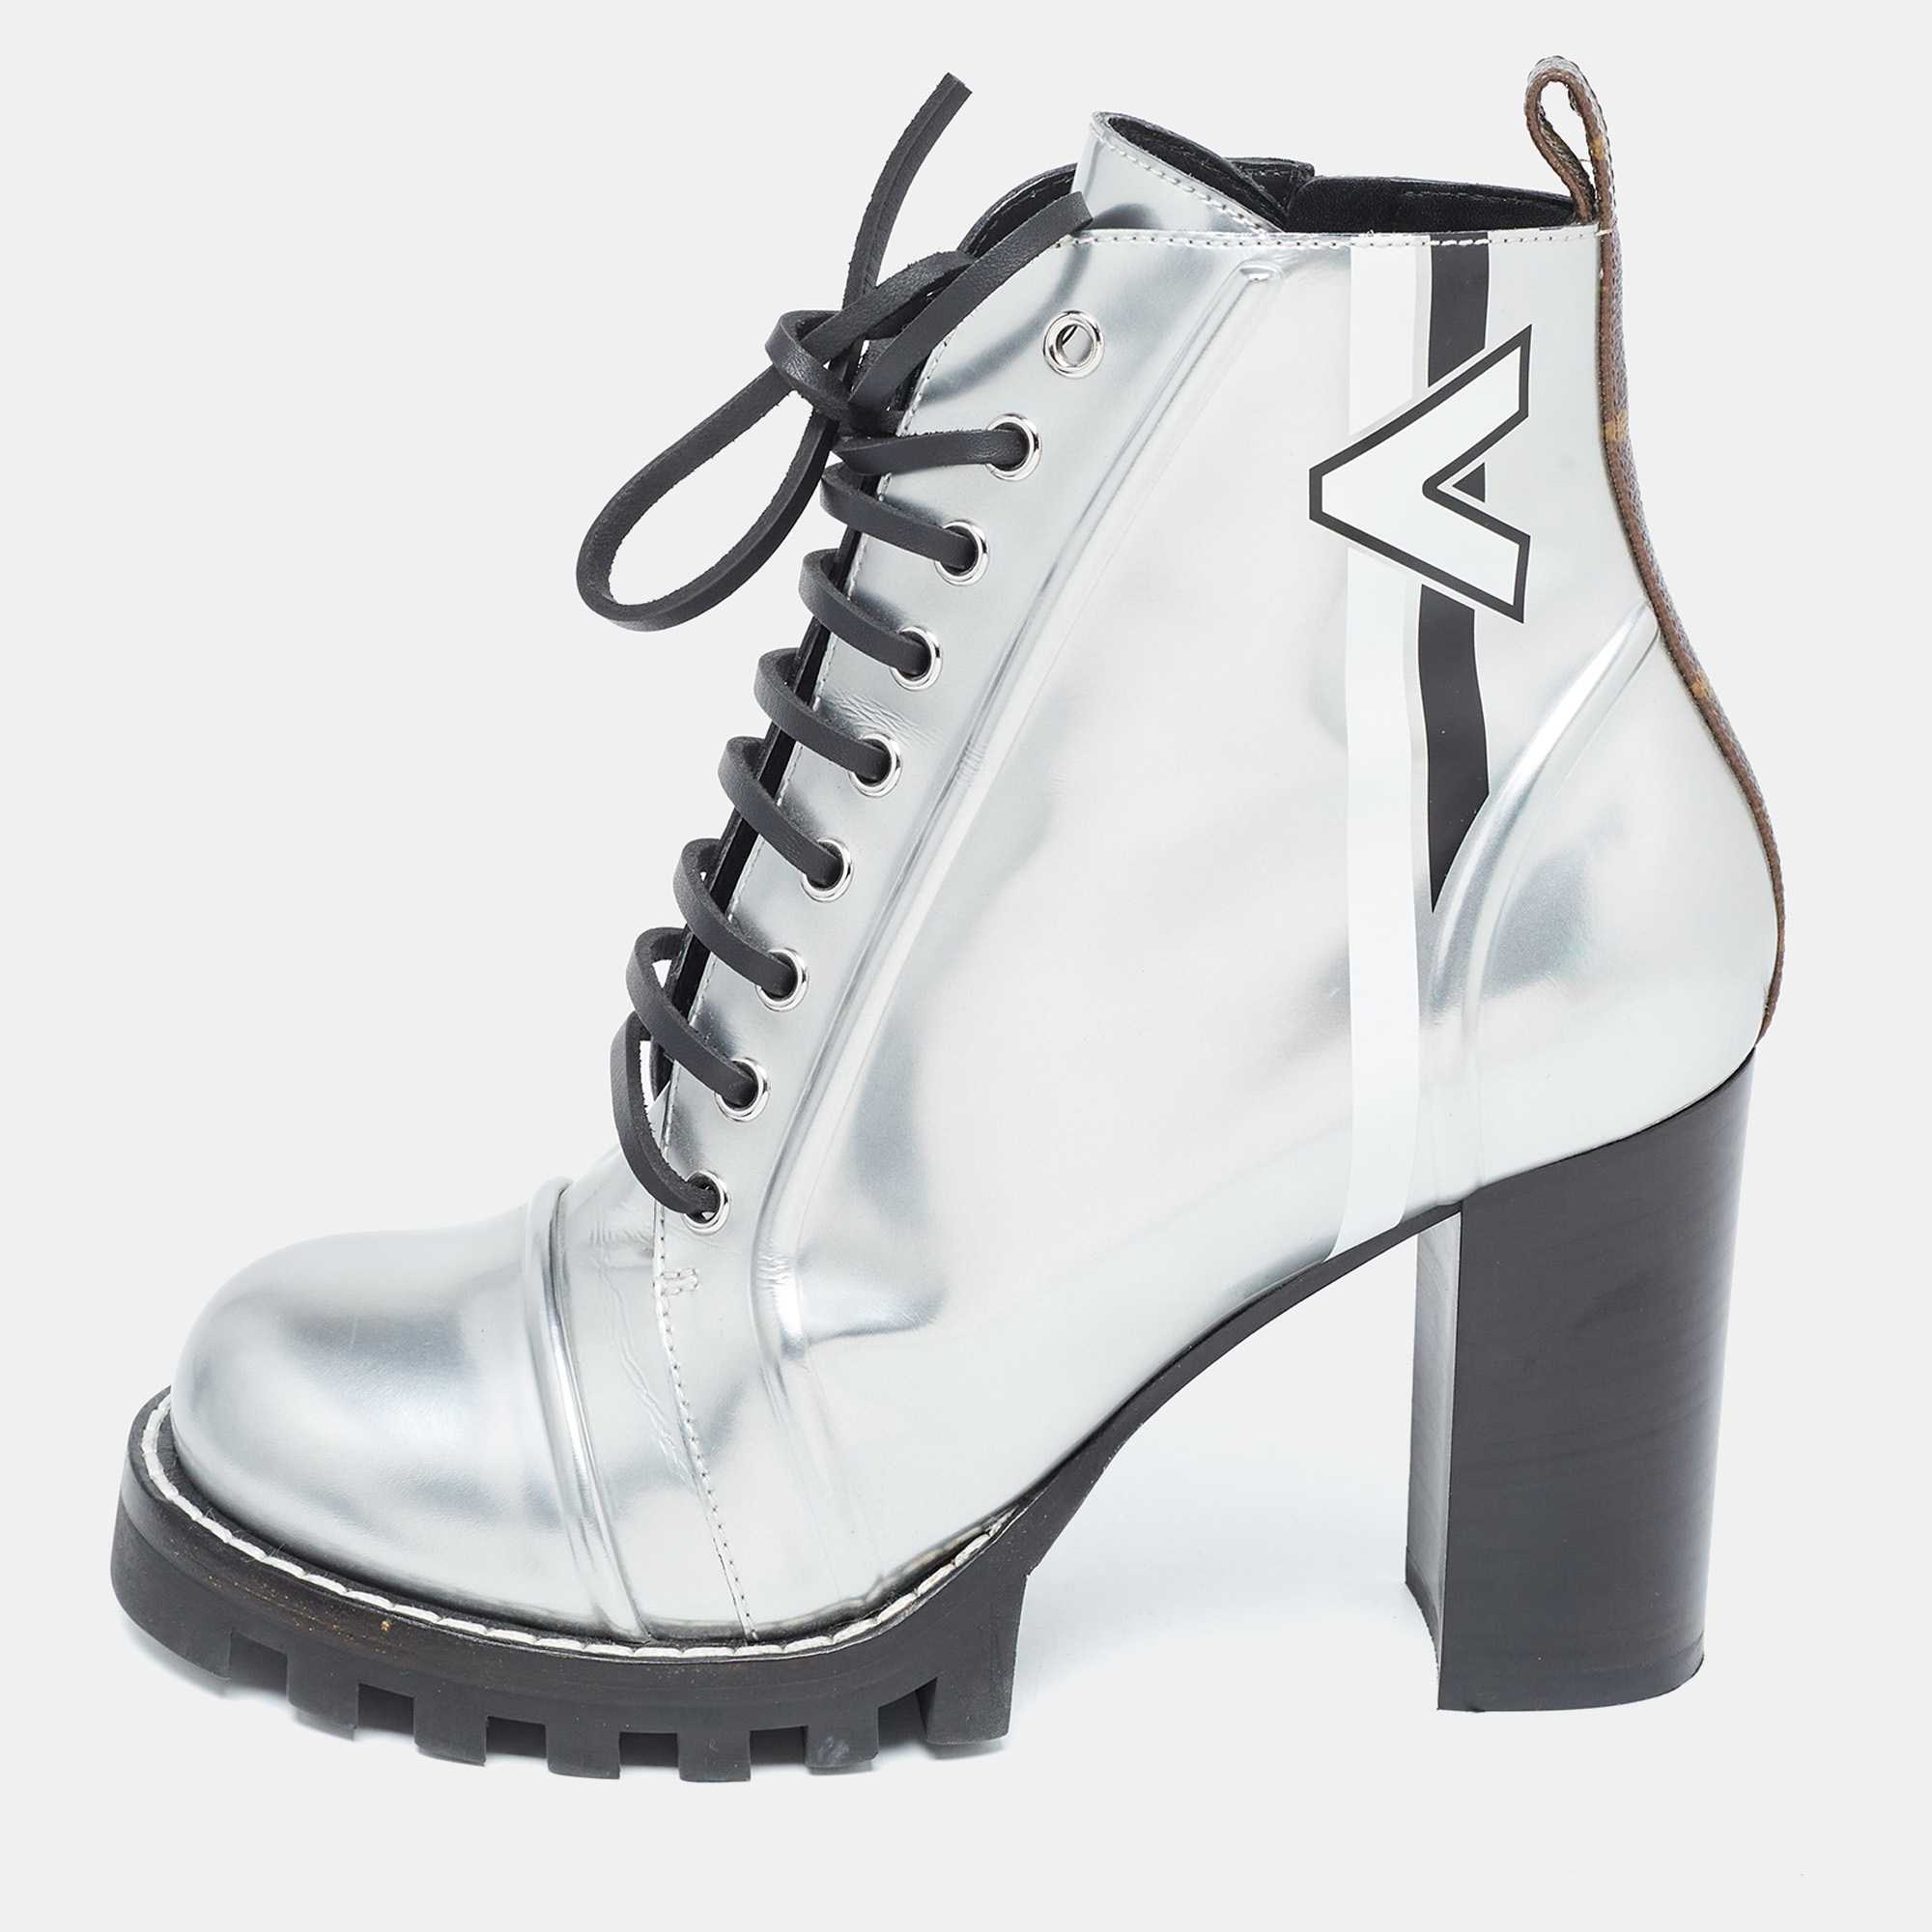 Louis vuitton silver leather spaceship ankle boots size 40